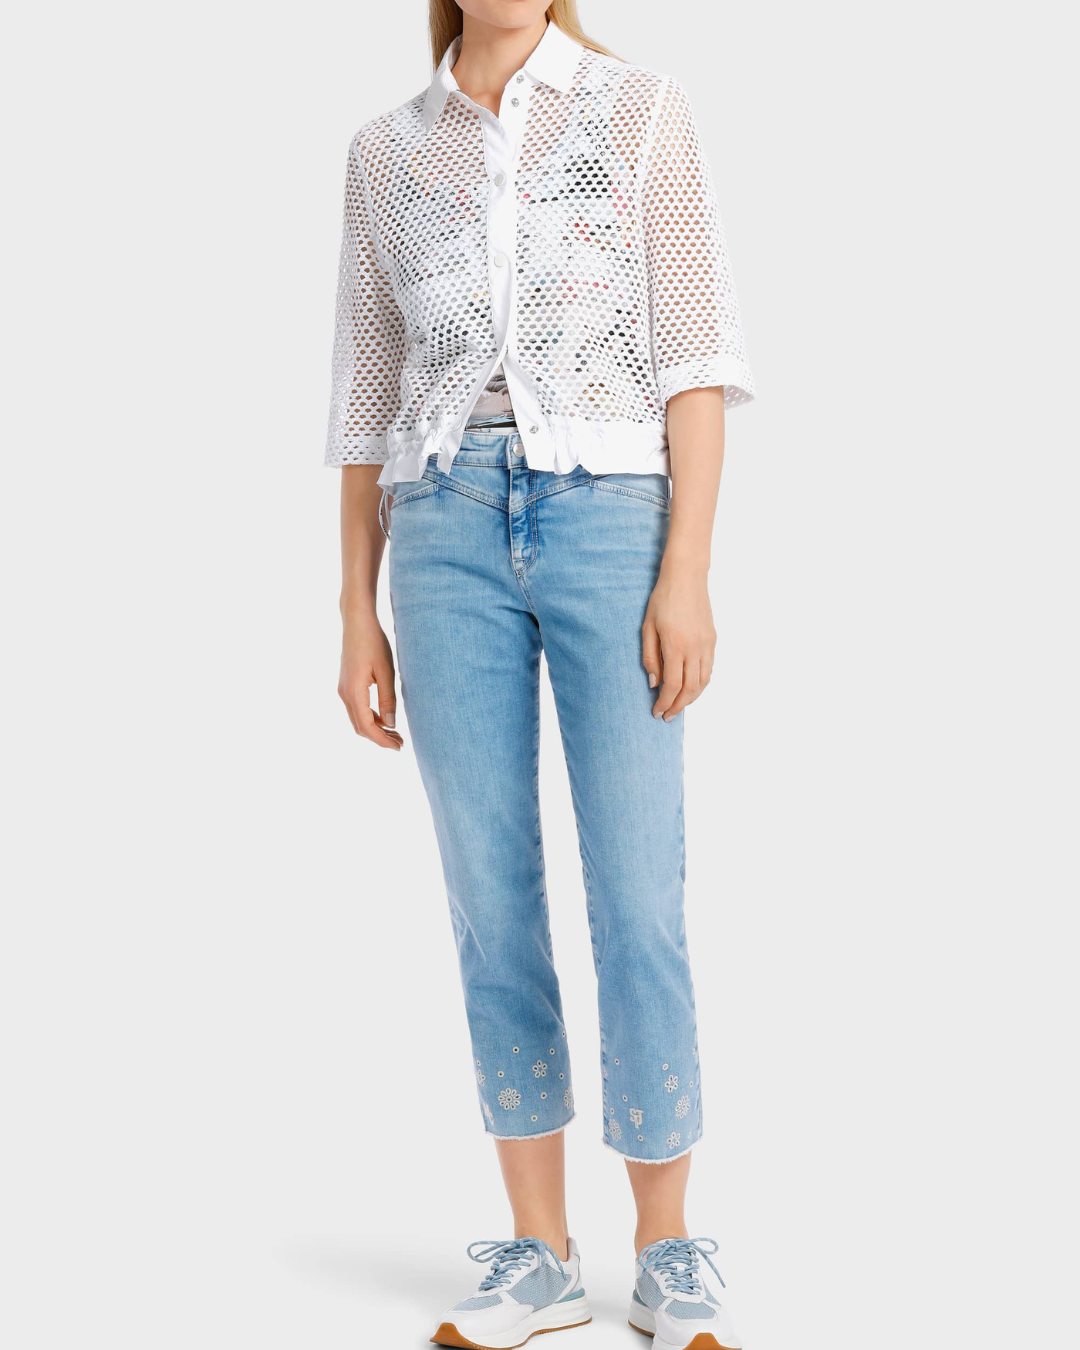 Airy mesh blouse